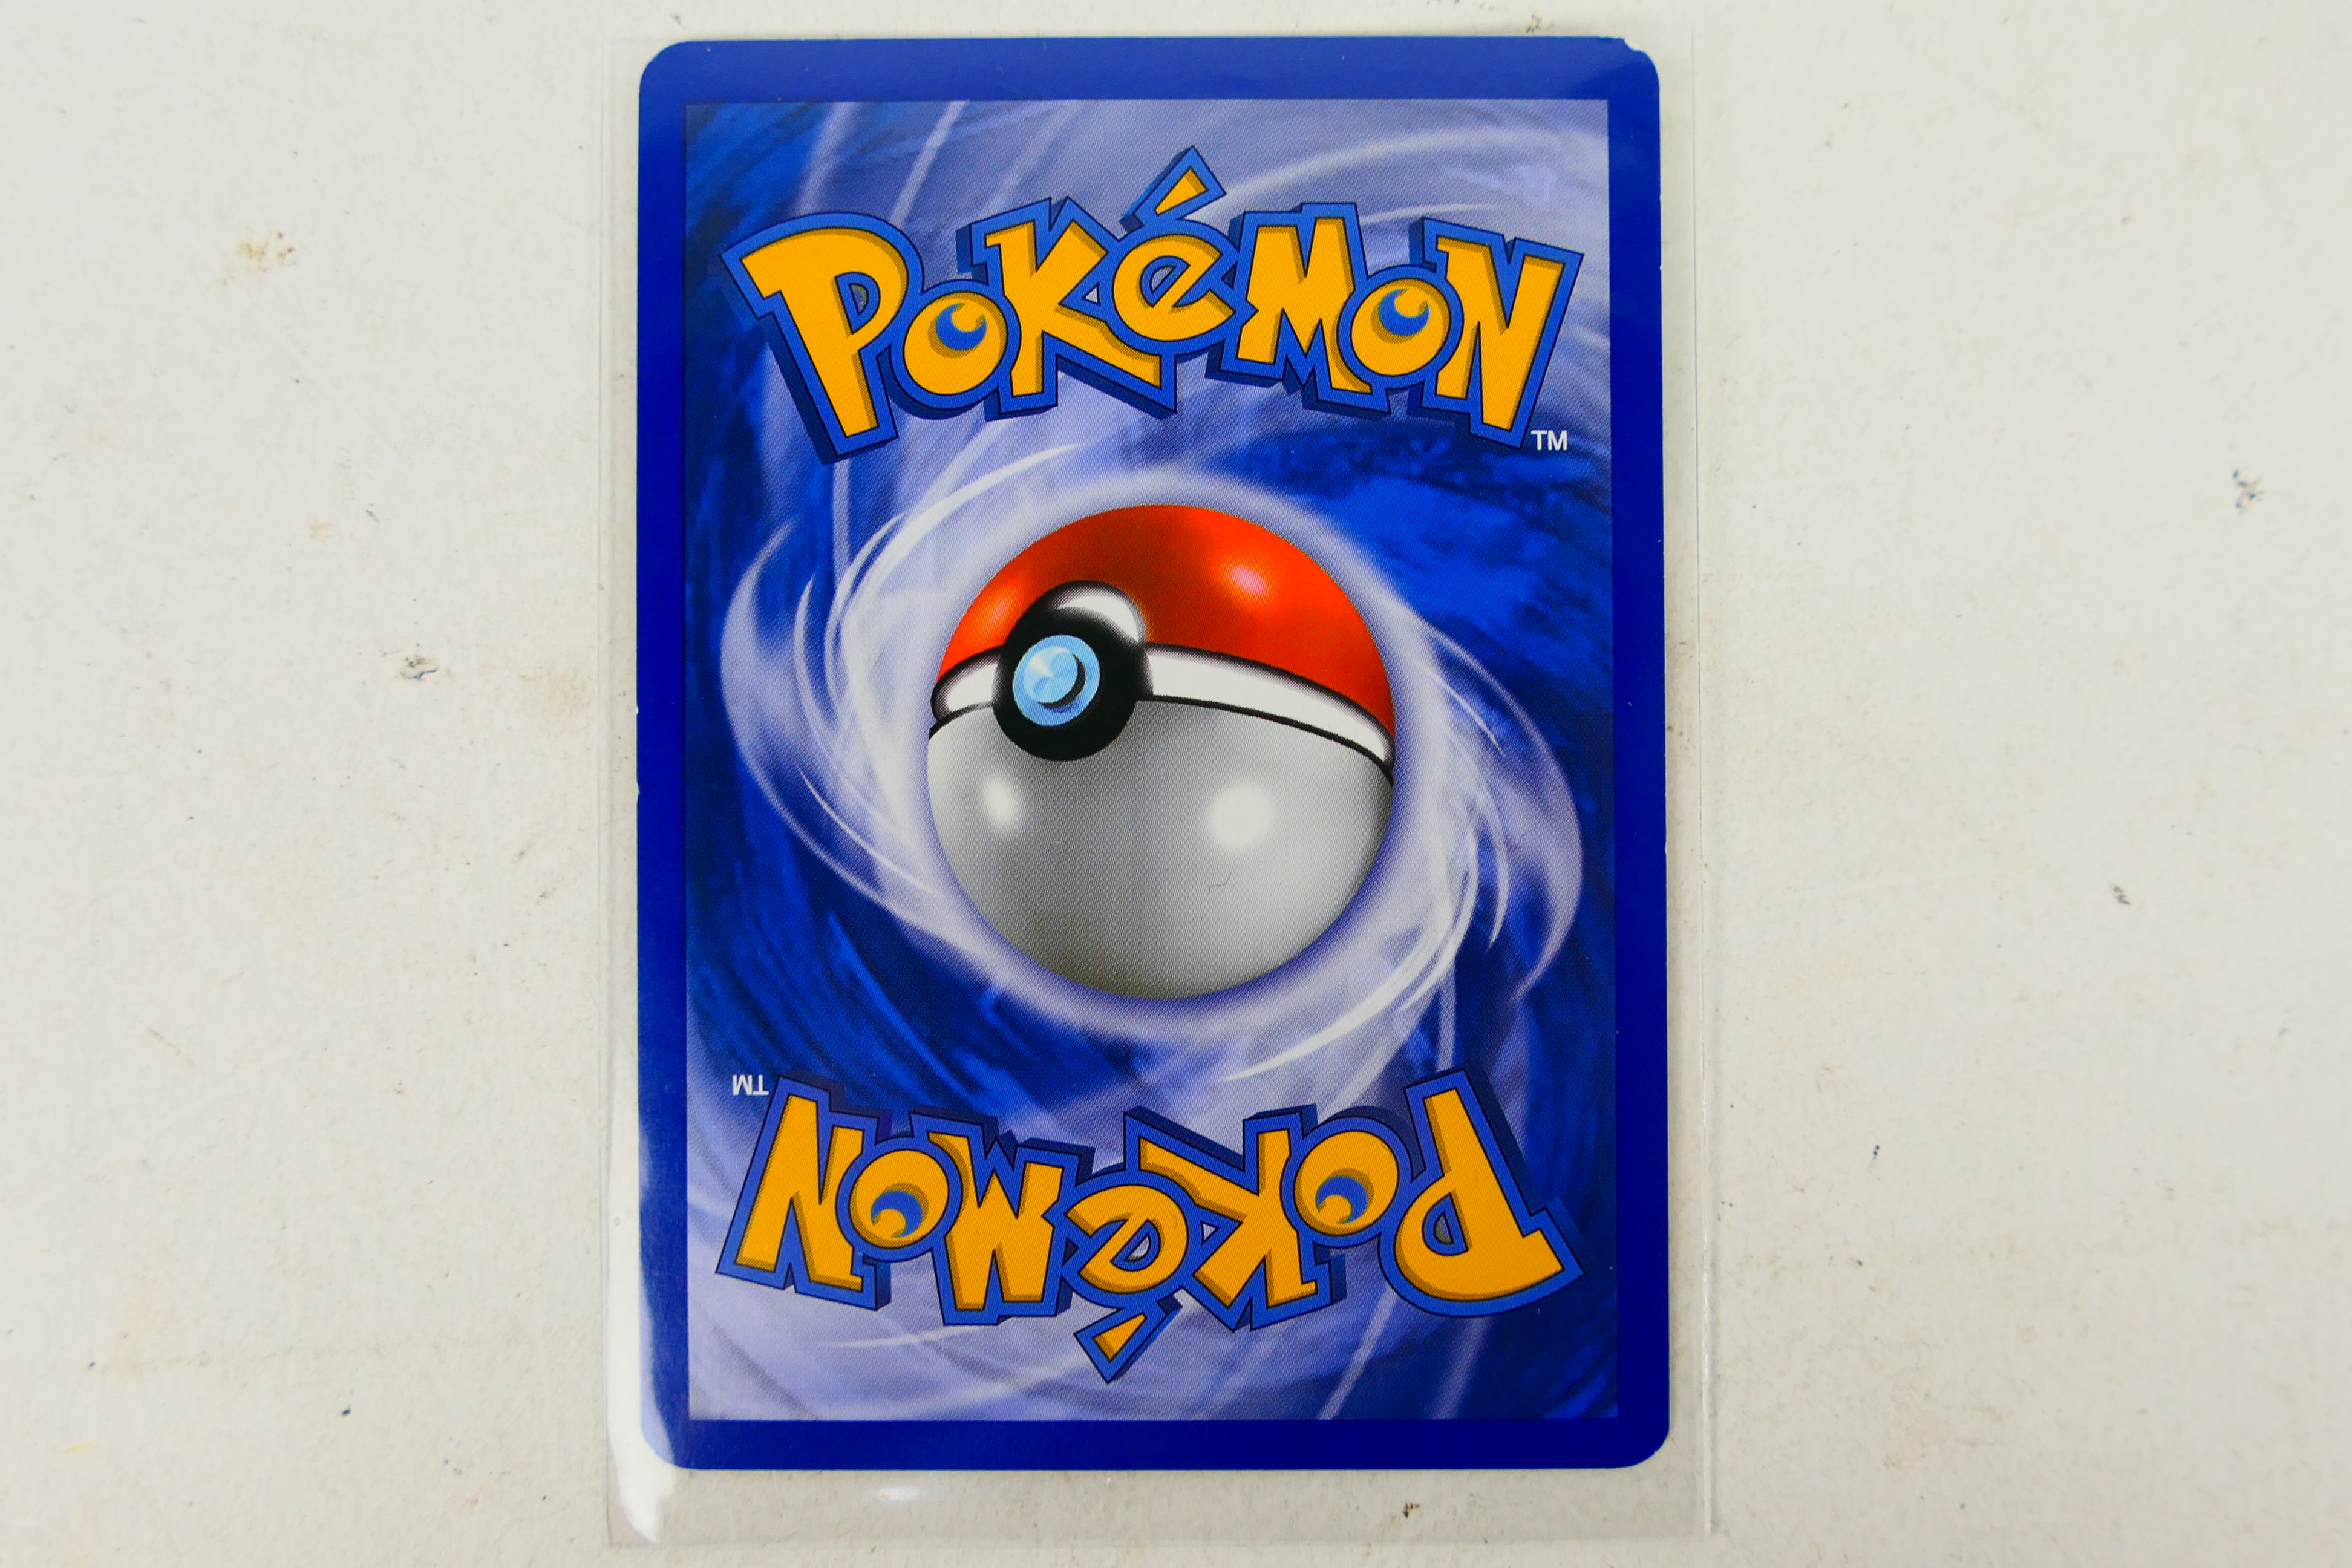 Pokemon - A Pokemon Battle Road Victory Medal Trainer Card for Autumn 2009 / 2010, - Image 5 of 5